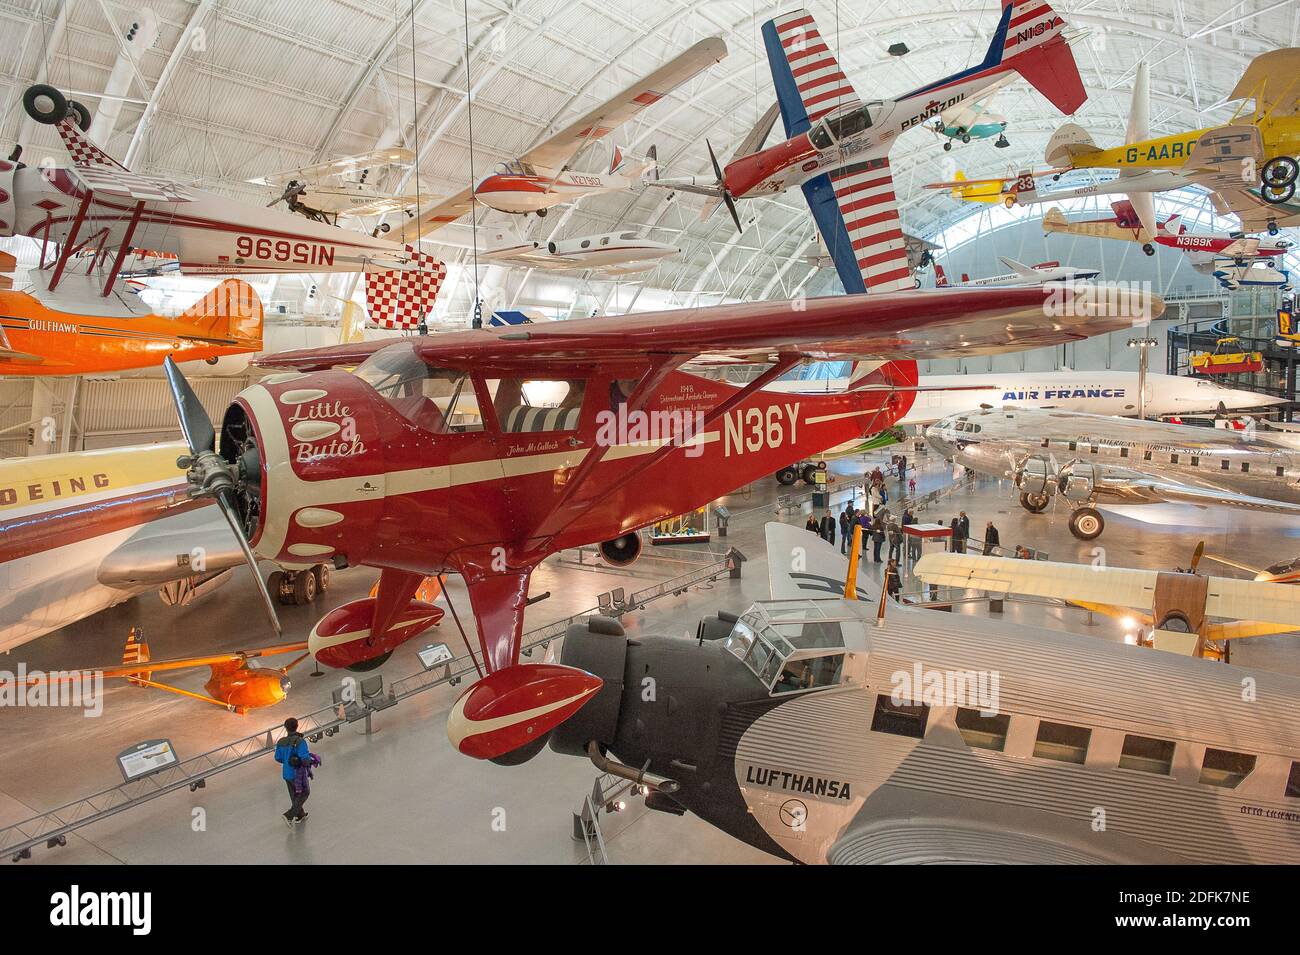 The Monocouple 110 Special hangs from the roof of the Smithsonian's National Air & Space Museum at the Steven F. Udvar-Hazy Center. Stock Photo